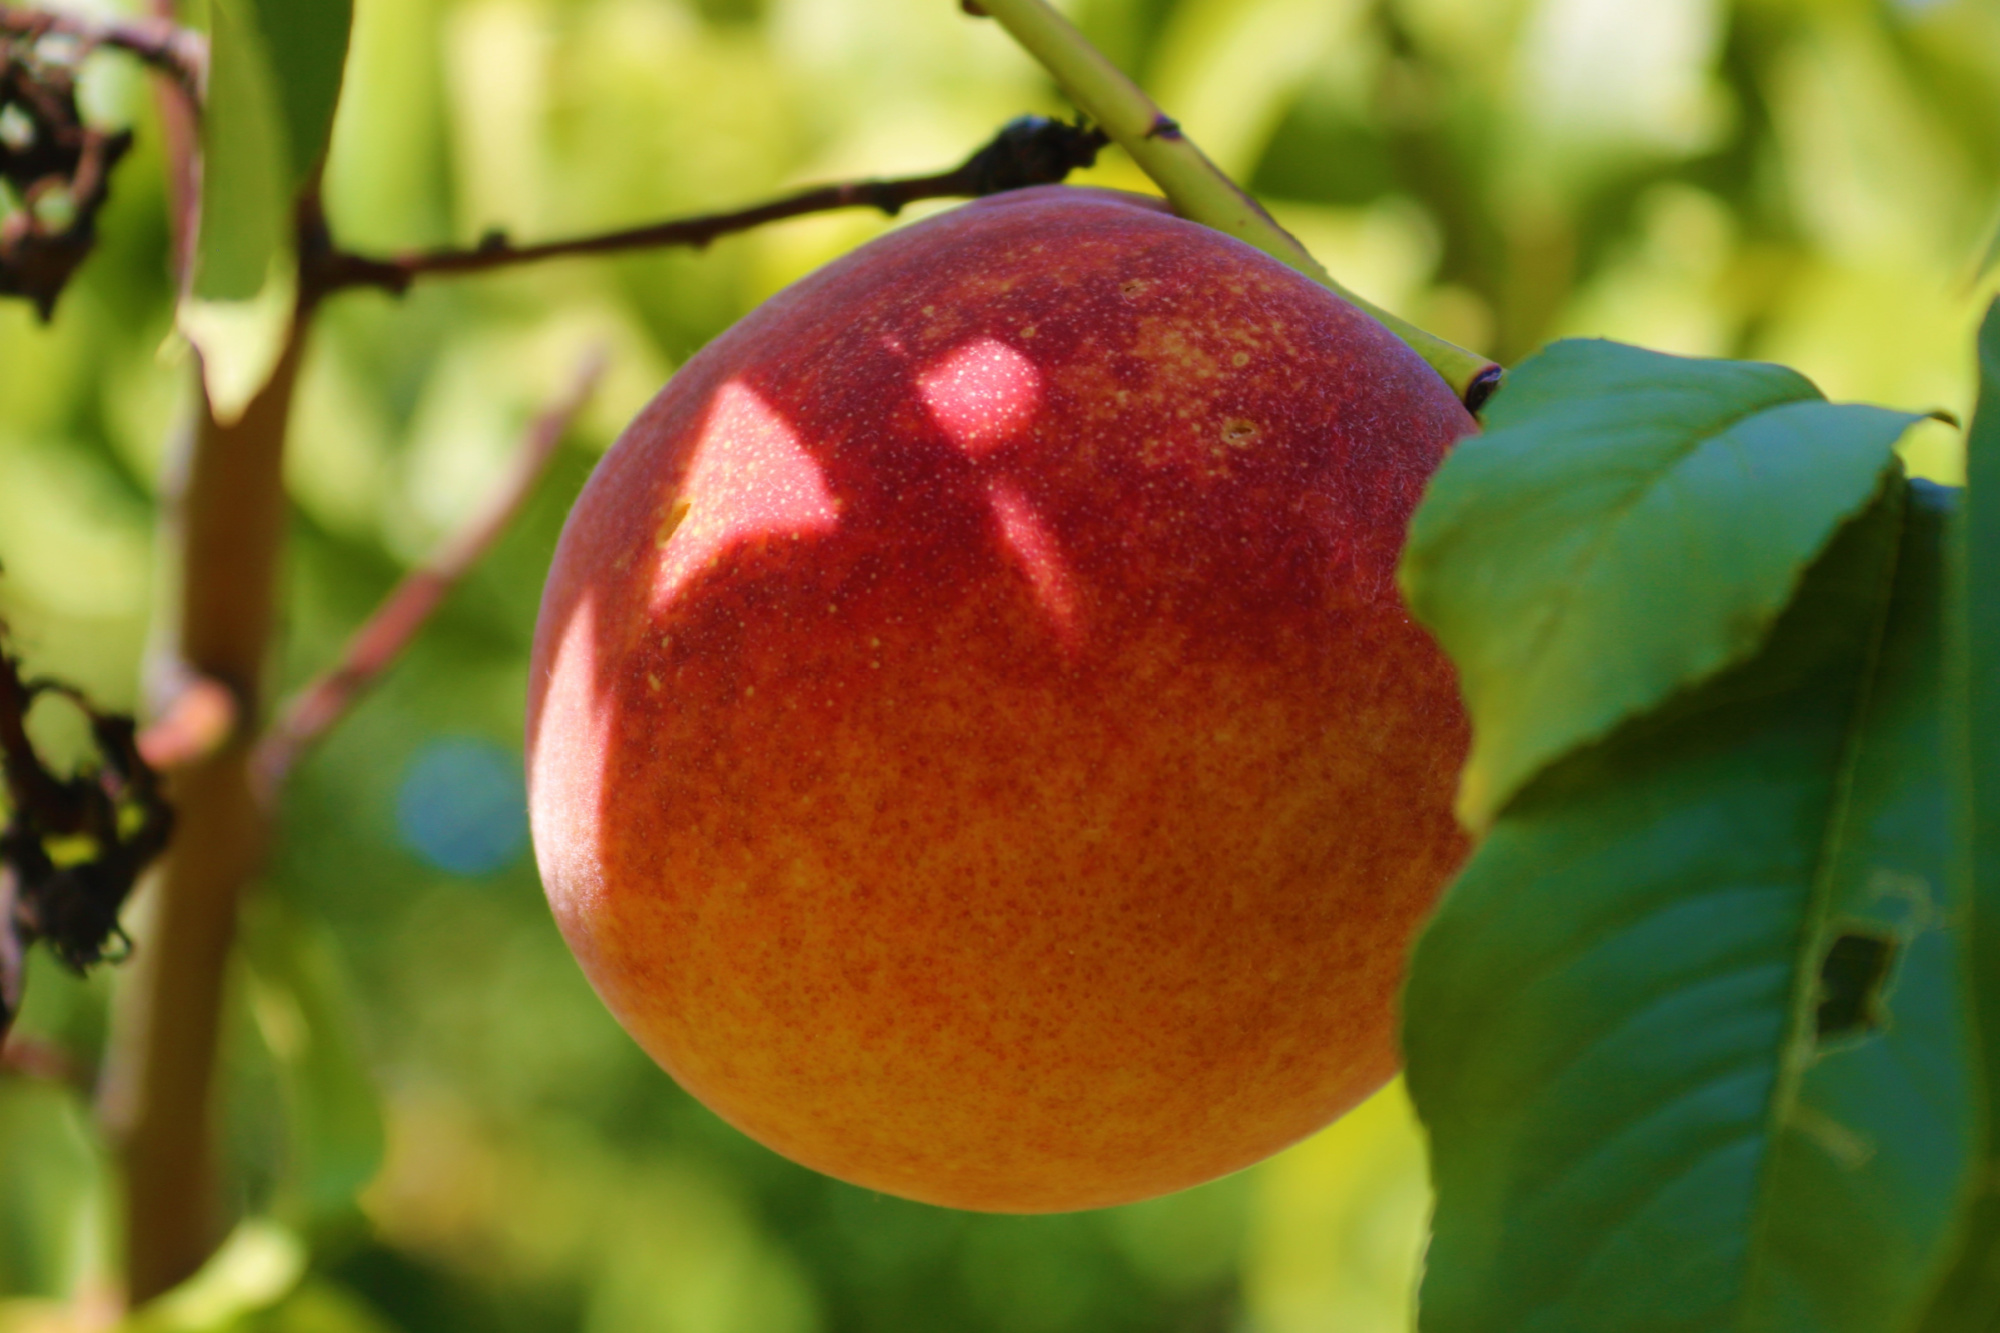 A ripe peach hangs on a branch surrounded by green leaves, with sunlight casting a shadow on its surface.